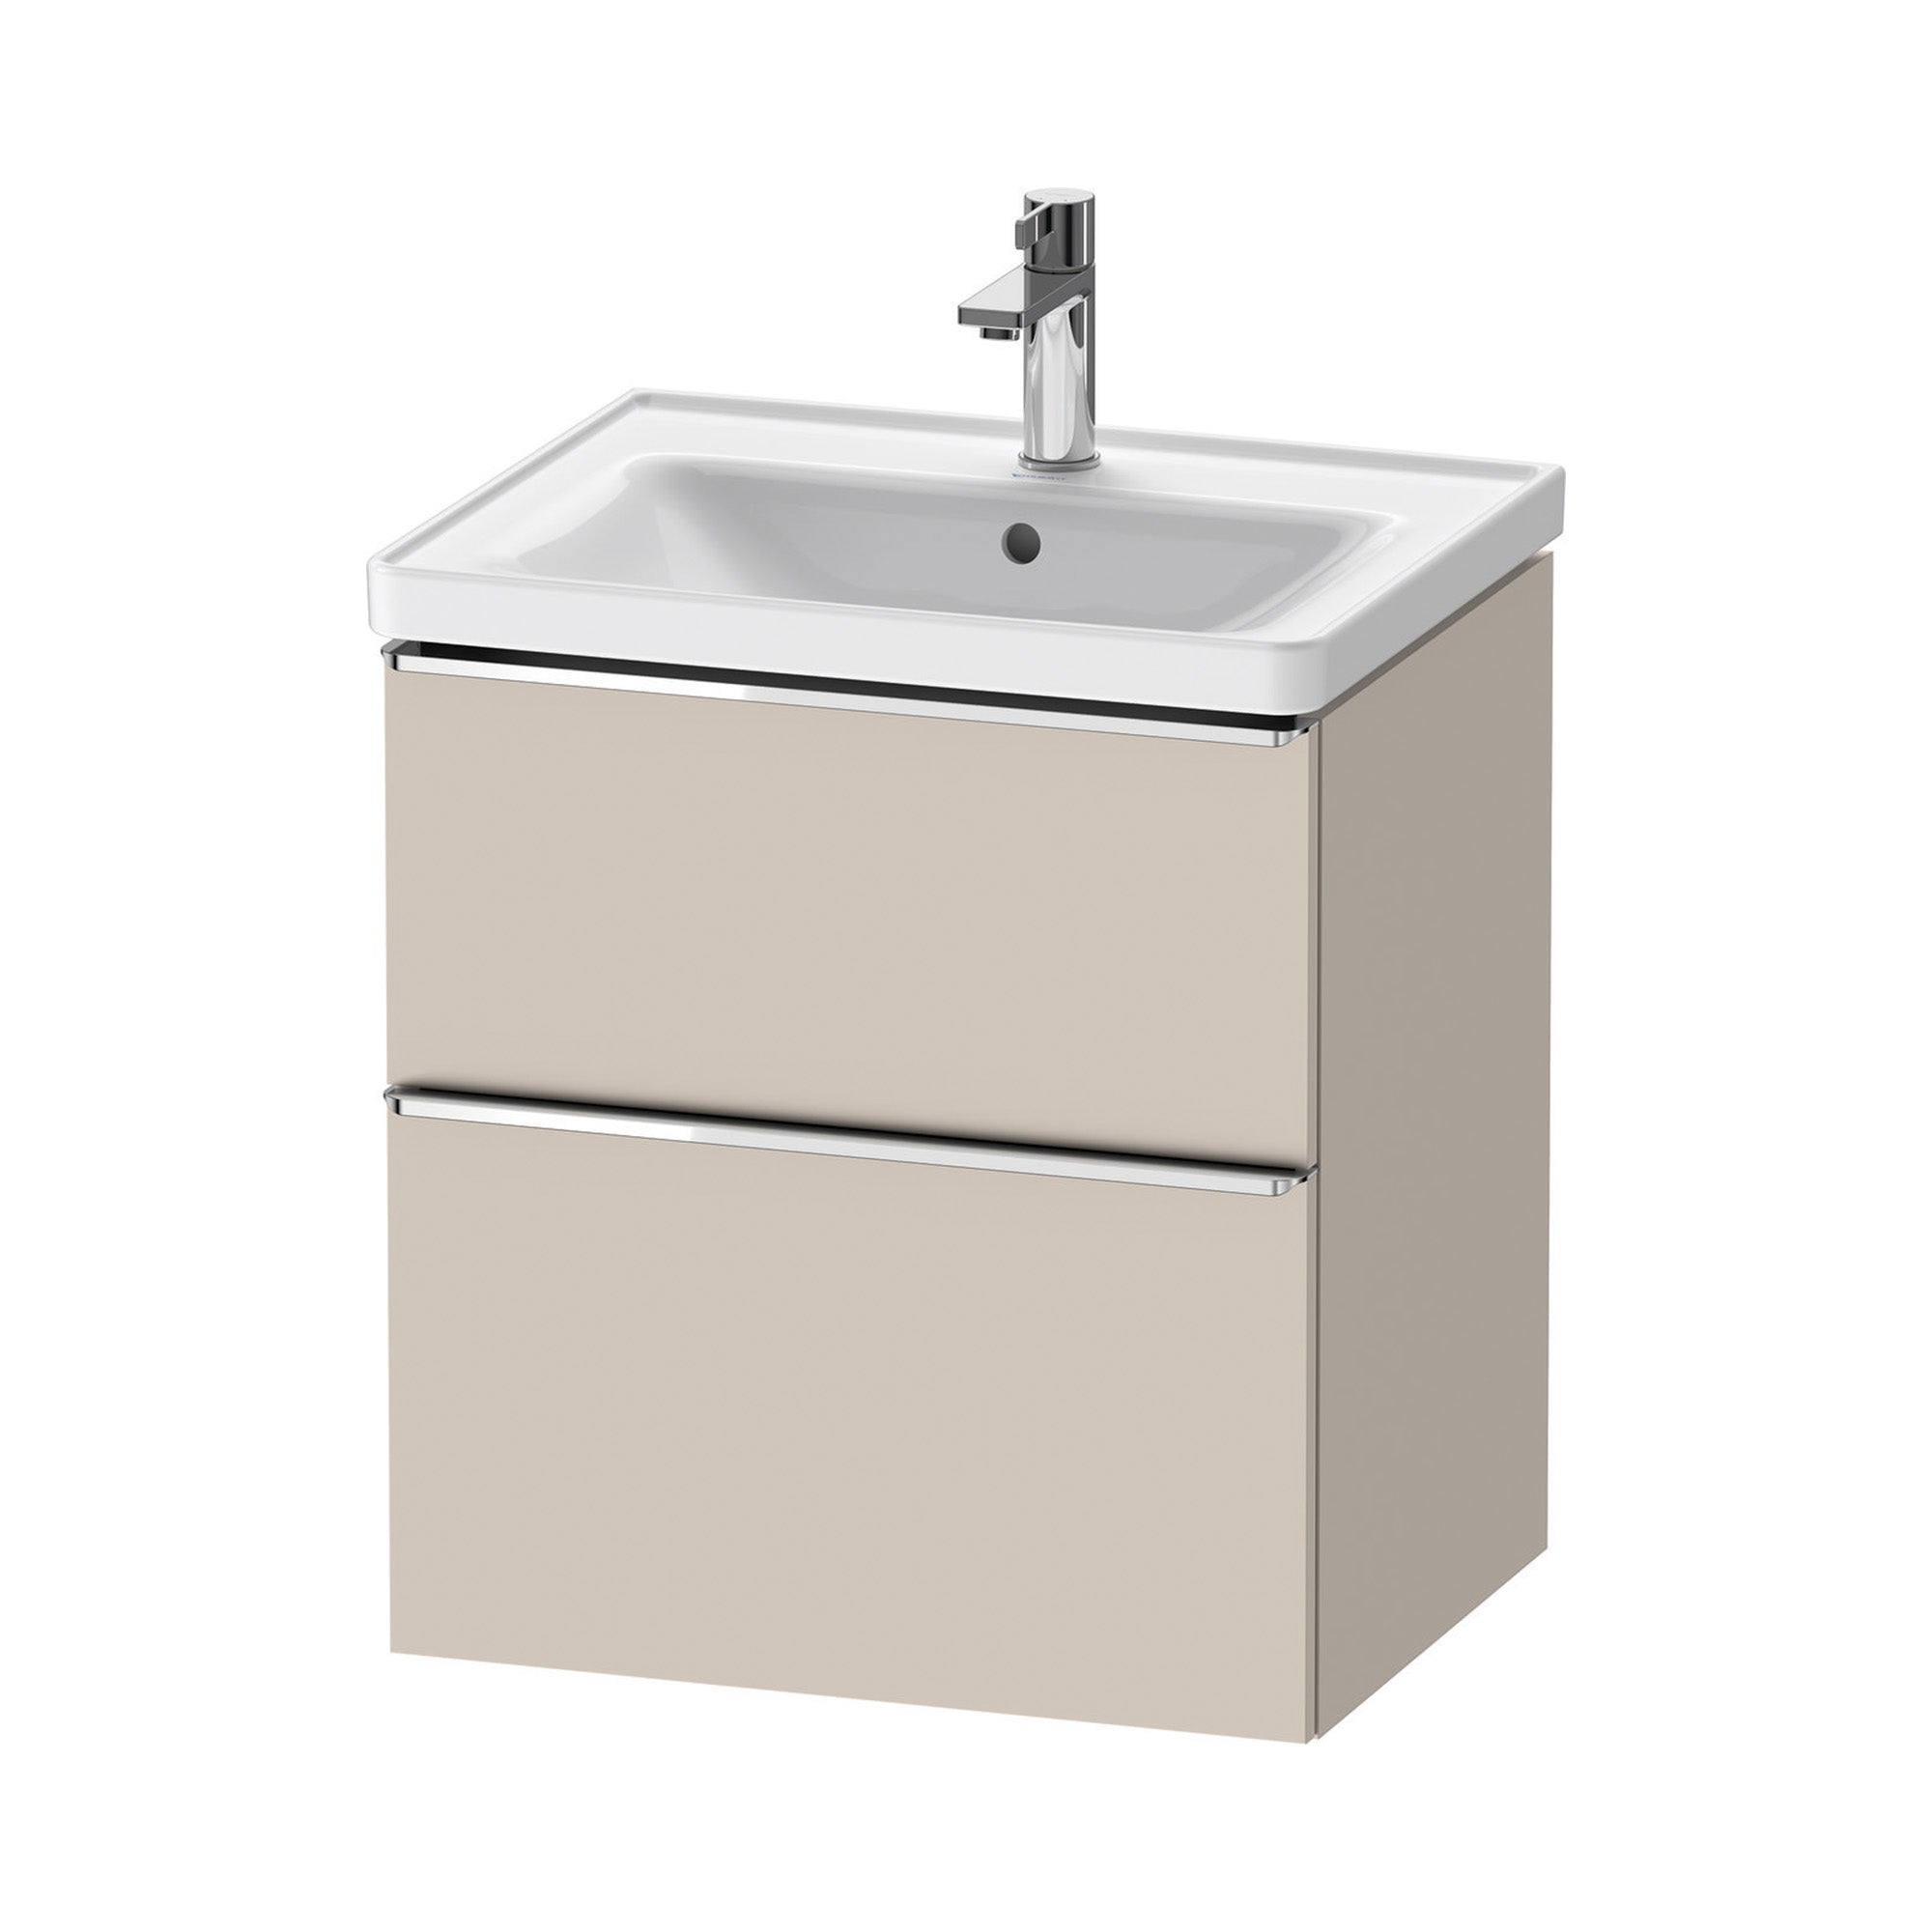 duravit d-neo 600 wall mounted vanity unit with d-neo basin taupe chrome handles